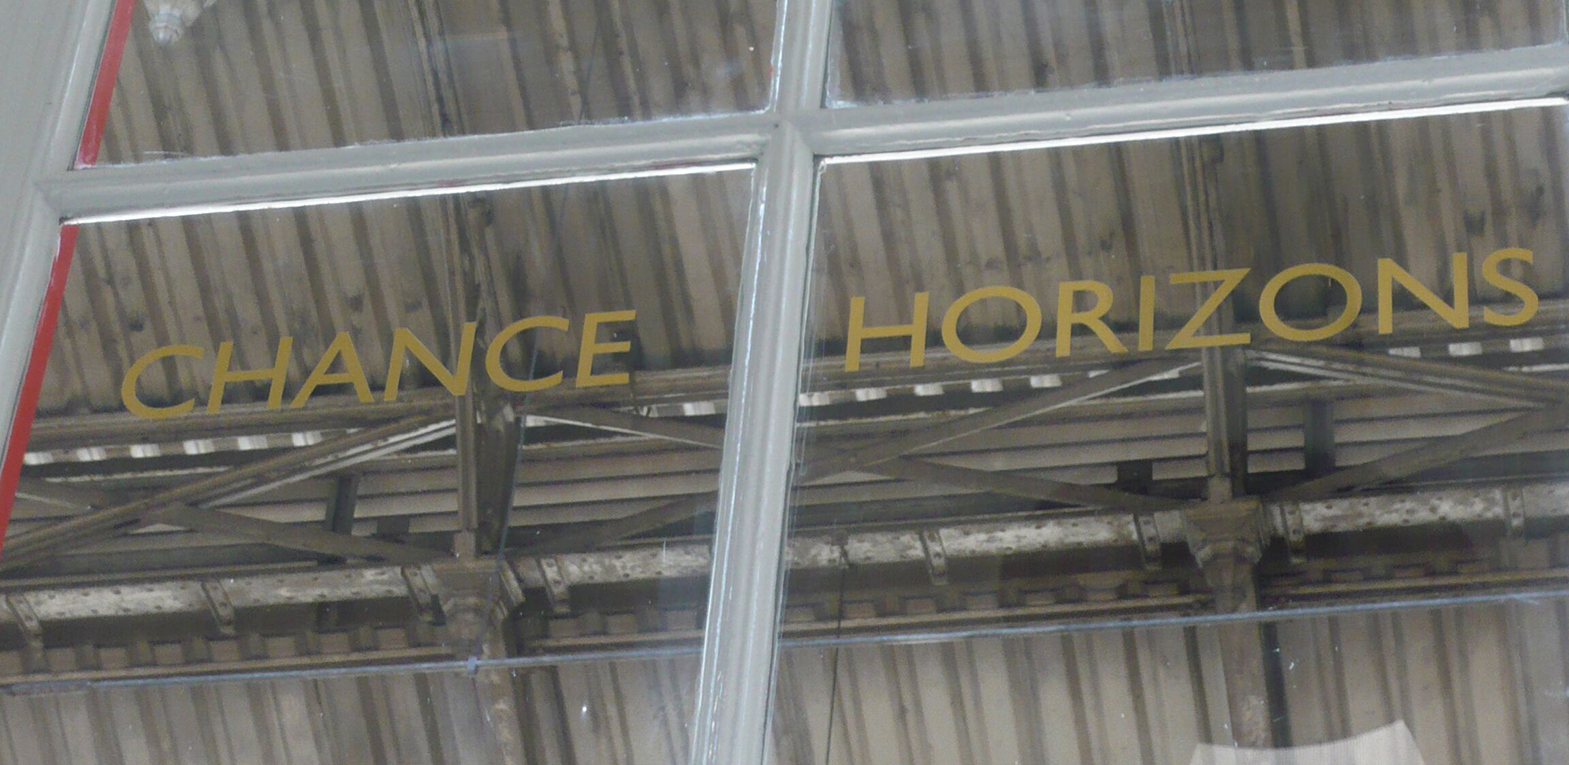 Letters on the windows of the waiting rooms of Preston train station as part of an artwork by Lisa Wigham. The words say 'chance horizons'